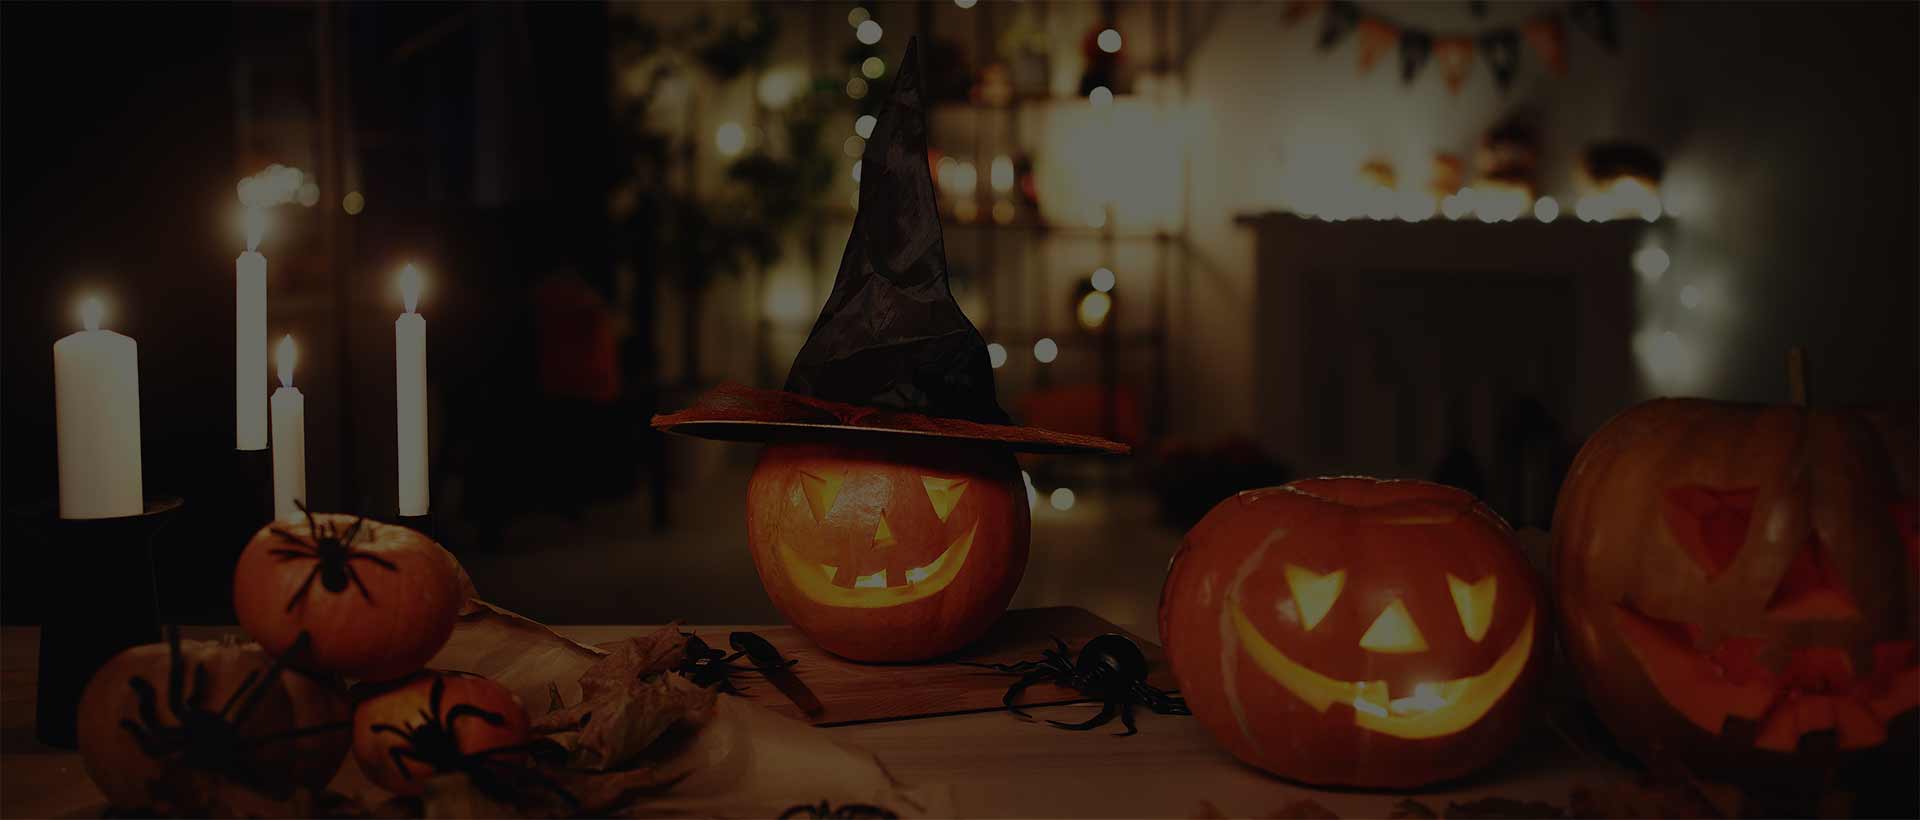 Image of pumpkins, candles and Halloween Decor